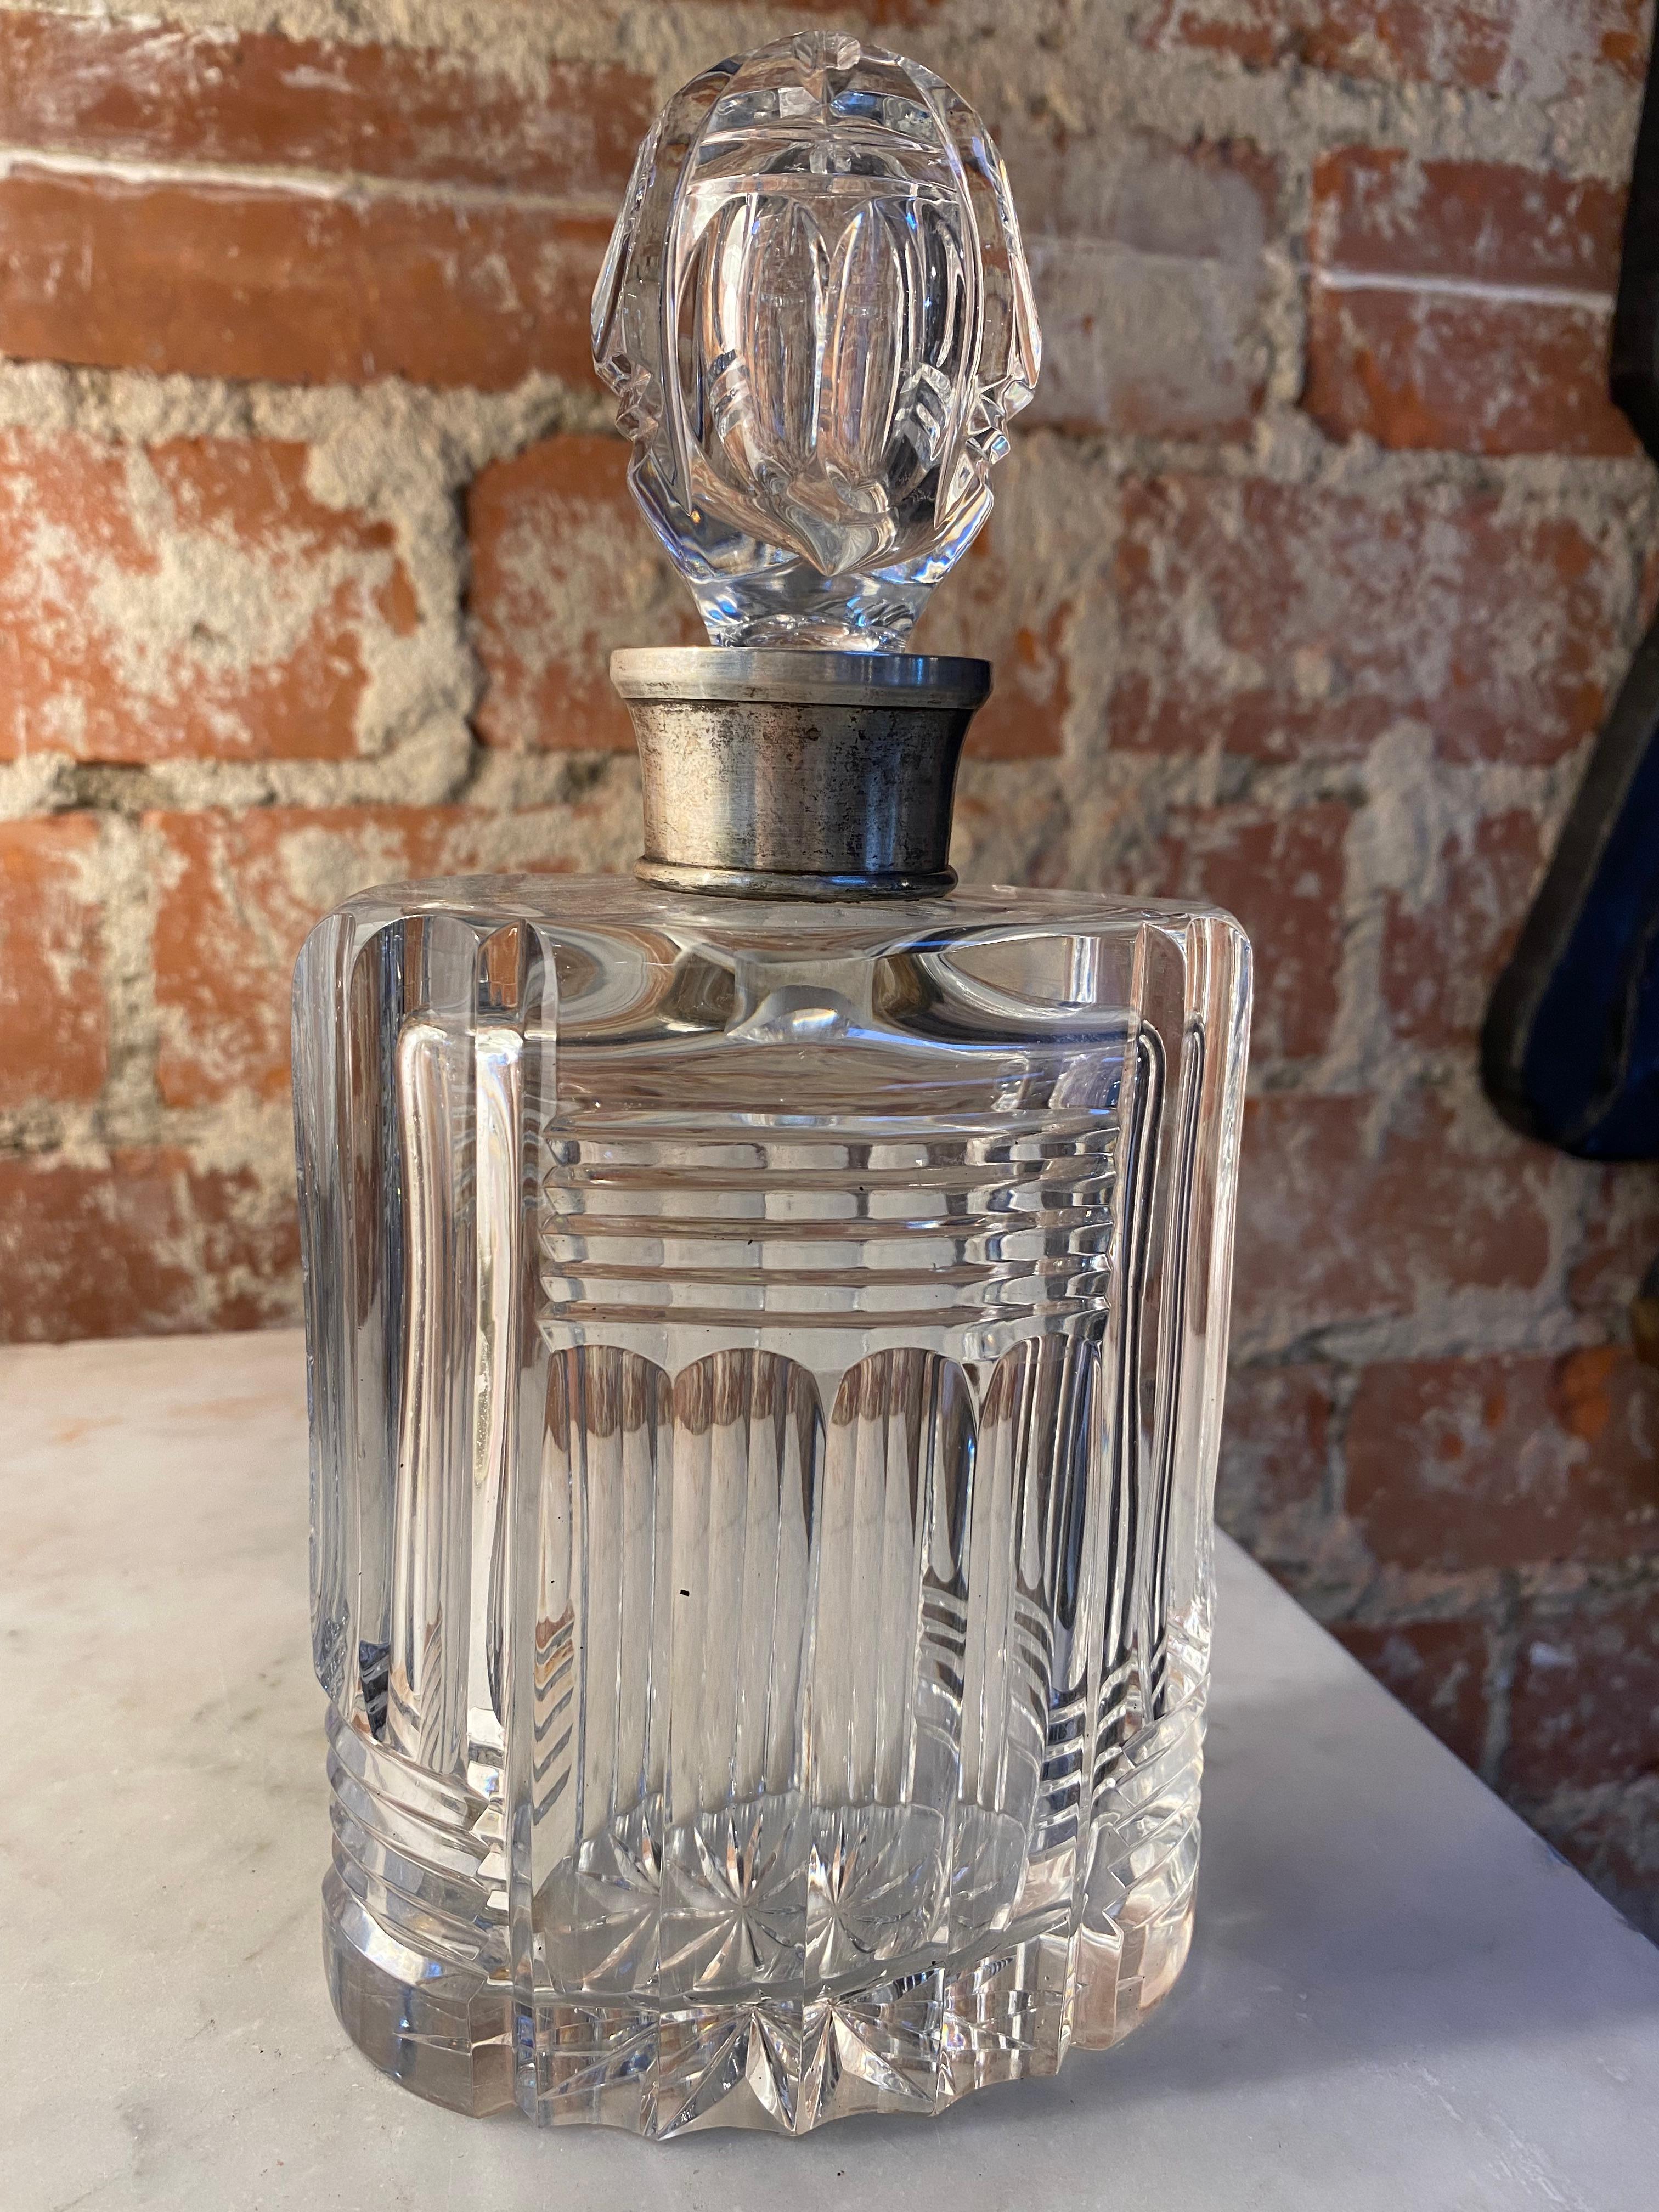 Decorative Italian crystal bottle made in 1960s.